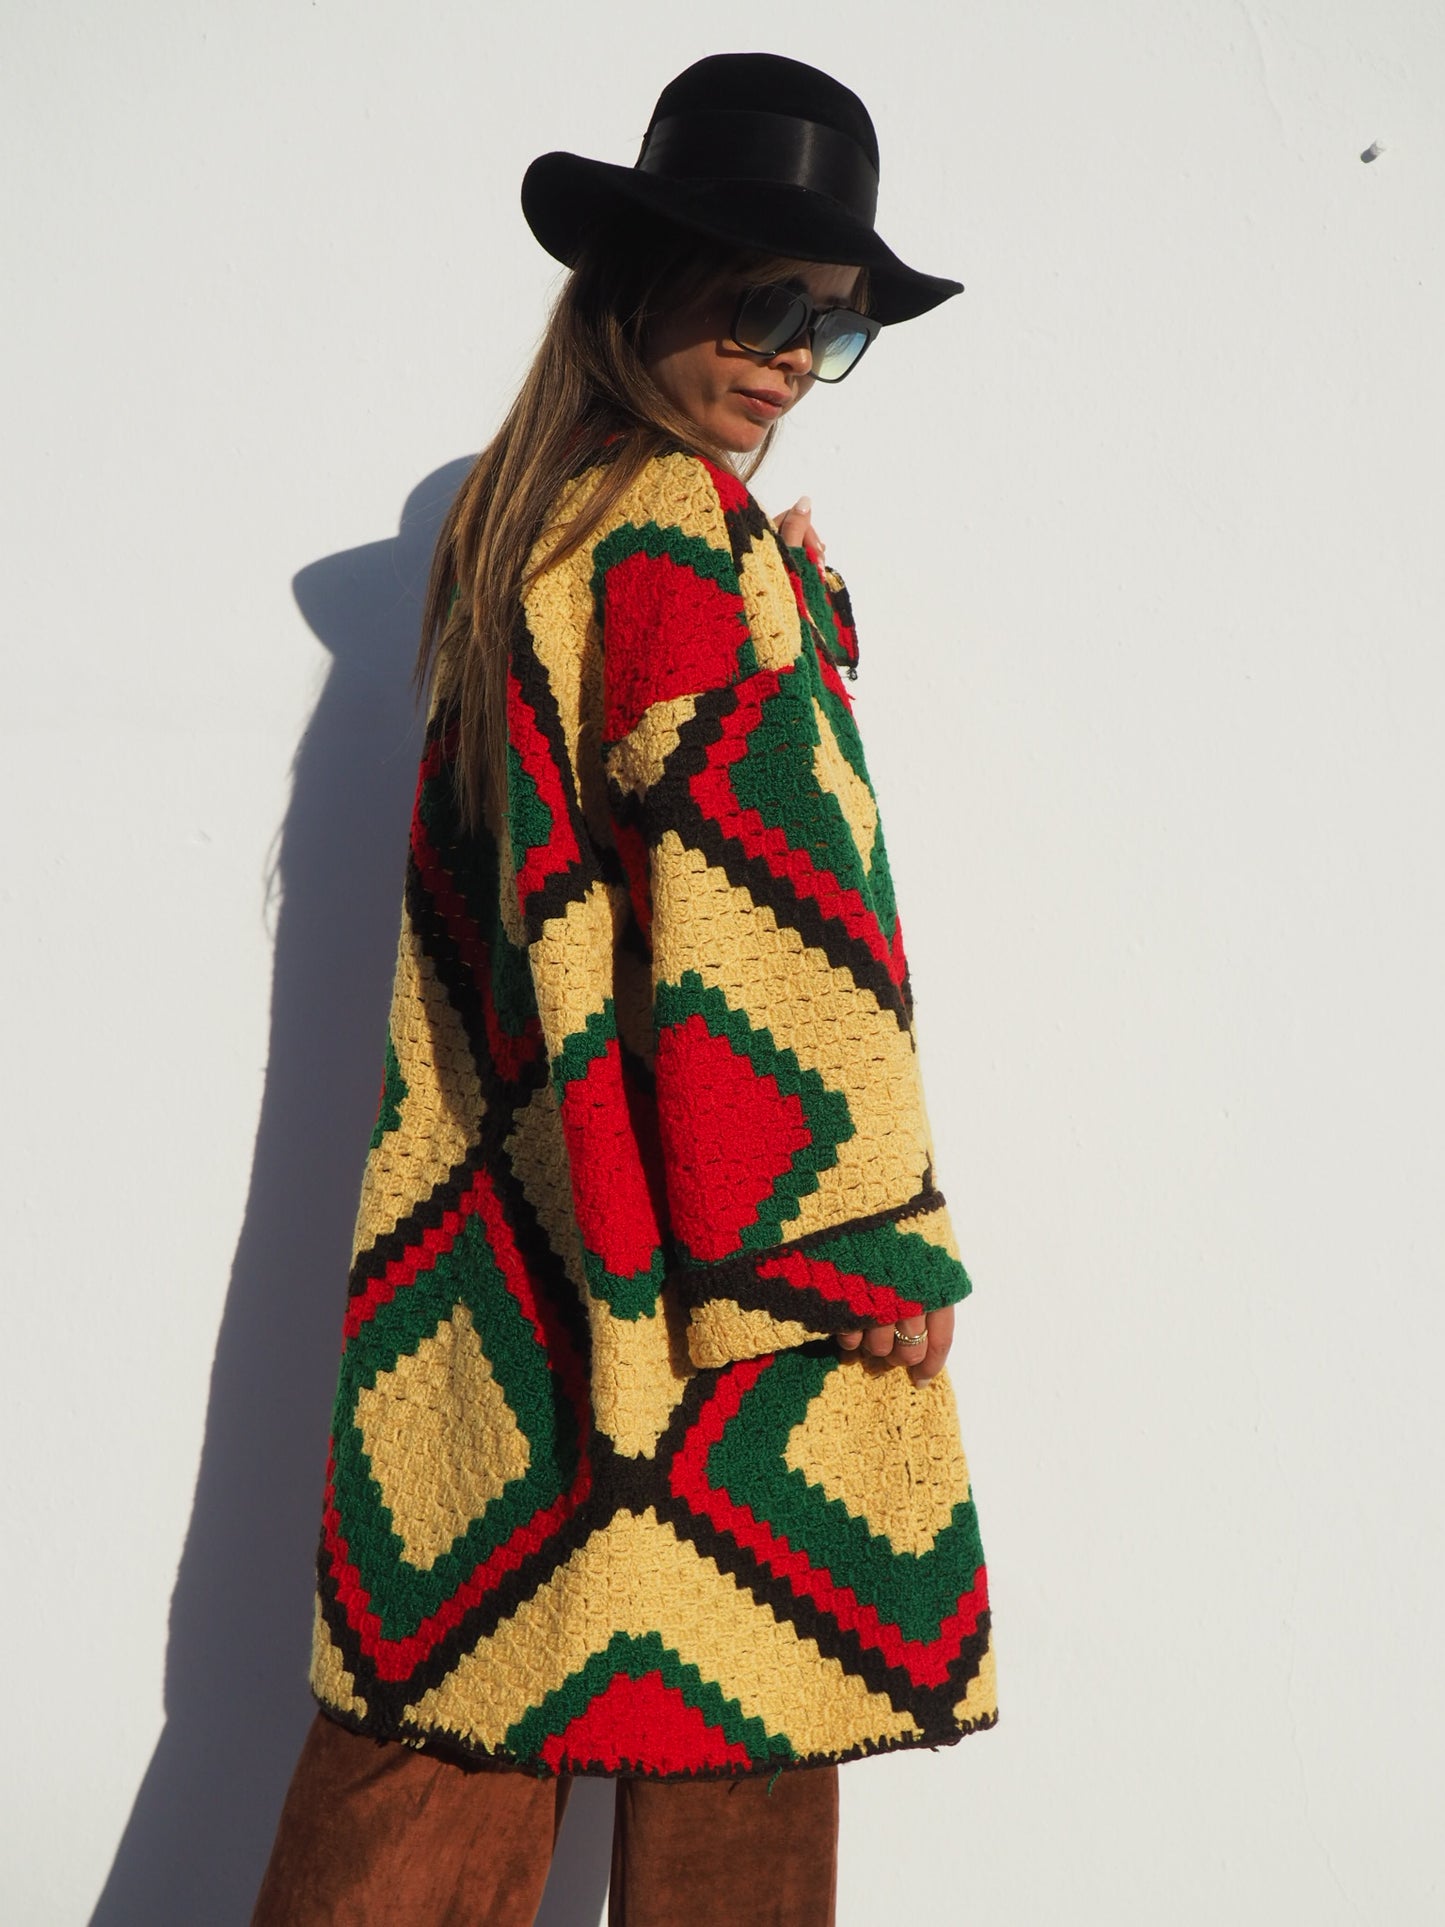 Vintage handmade crochet textiles in yellow green and brown up-cycled jacket by Vagabond Ibiza.